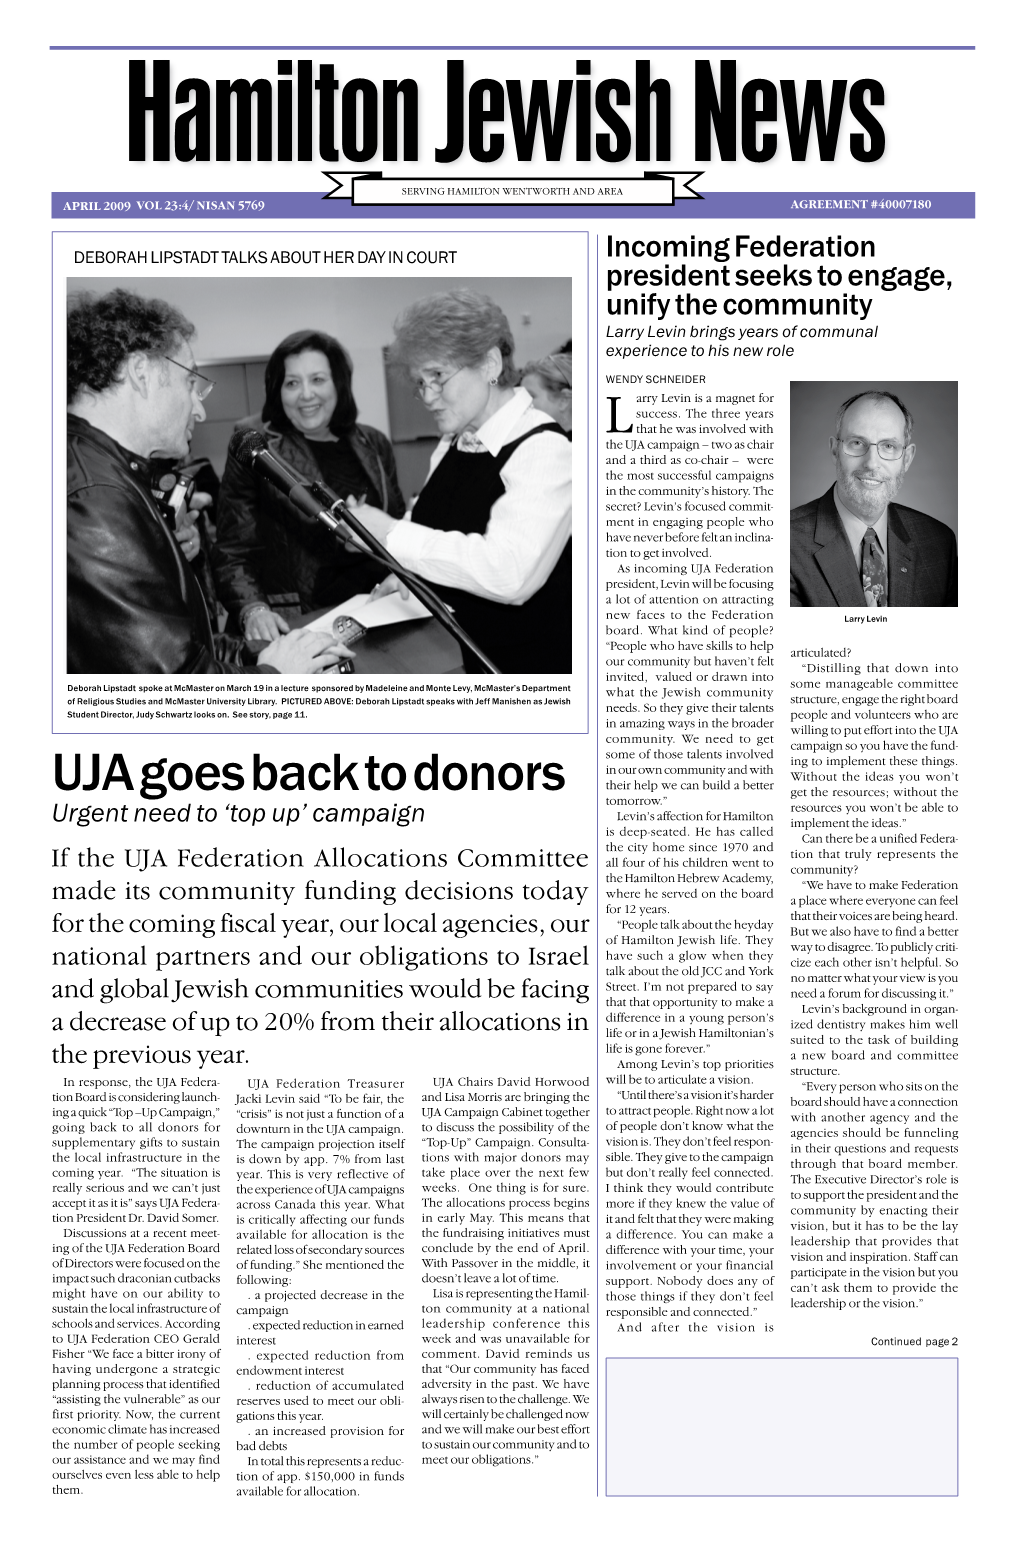 UJA Goes Back to Donors